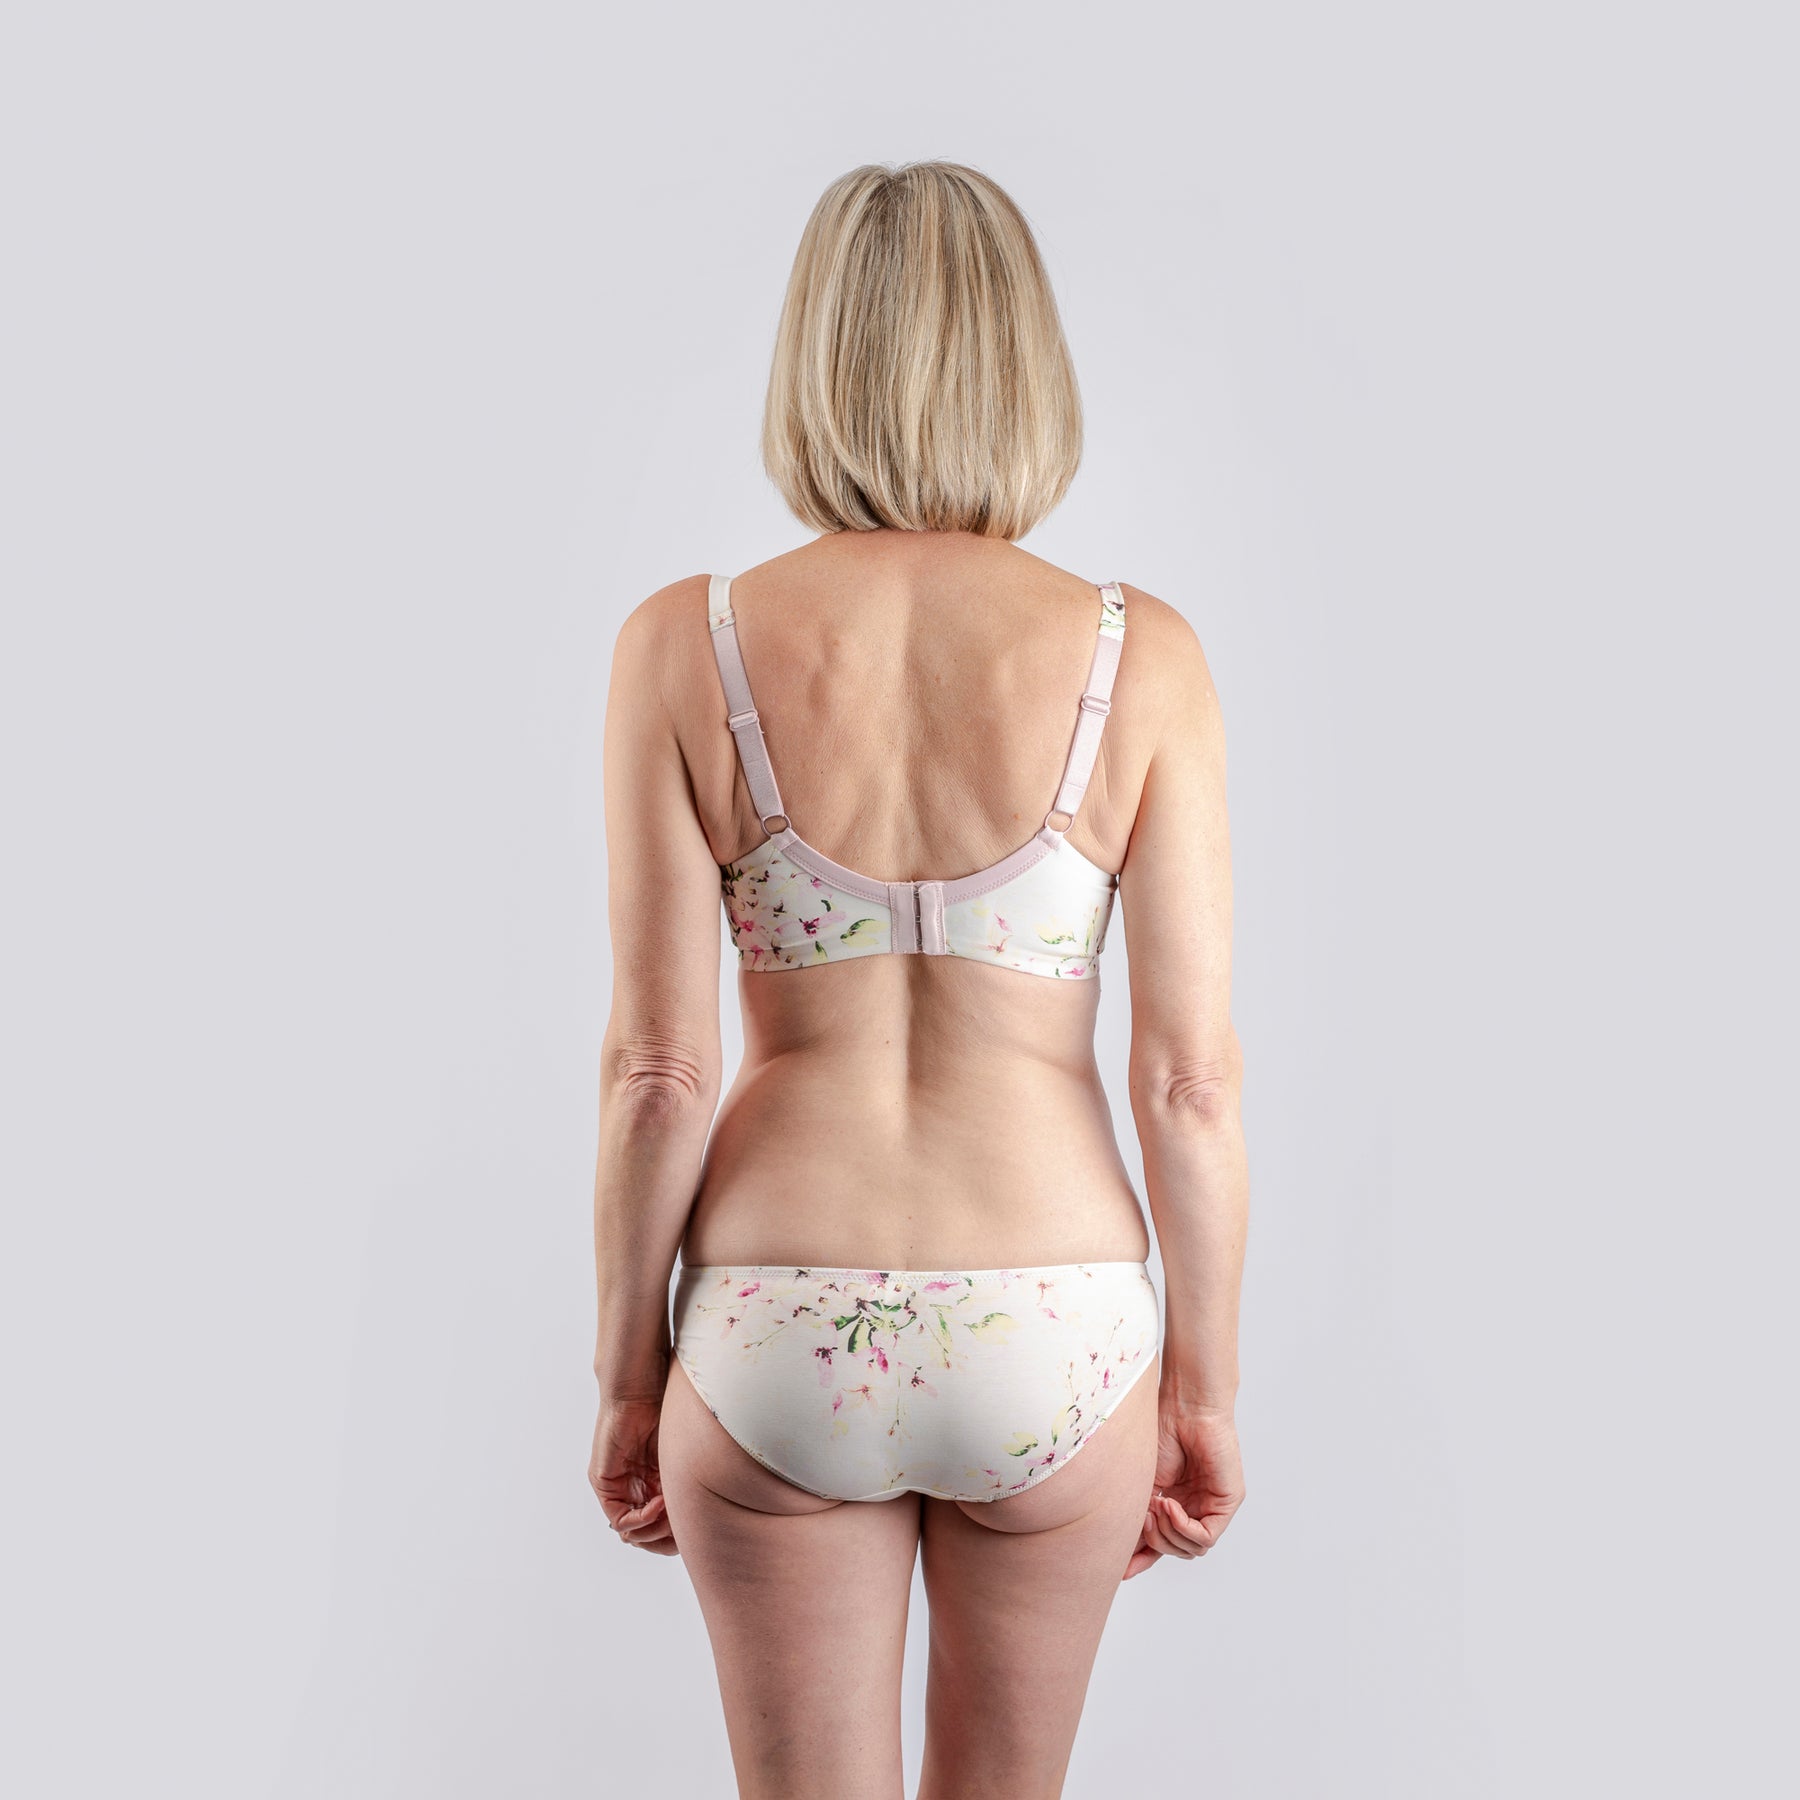 back view of woman wearing Pure Silk and Organic Cotton briefs made for people with latex sensitivity or eczema in the groin area and matching bra